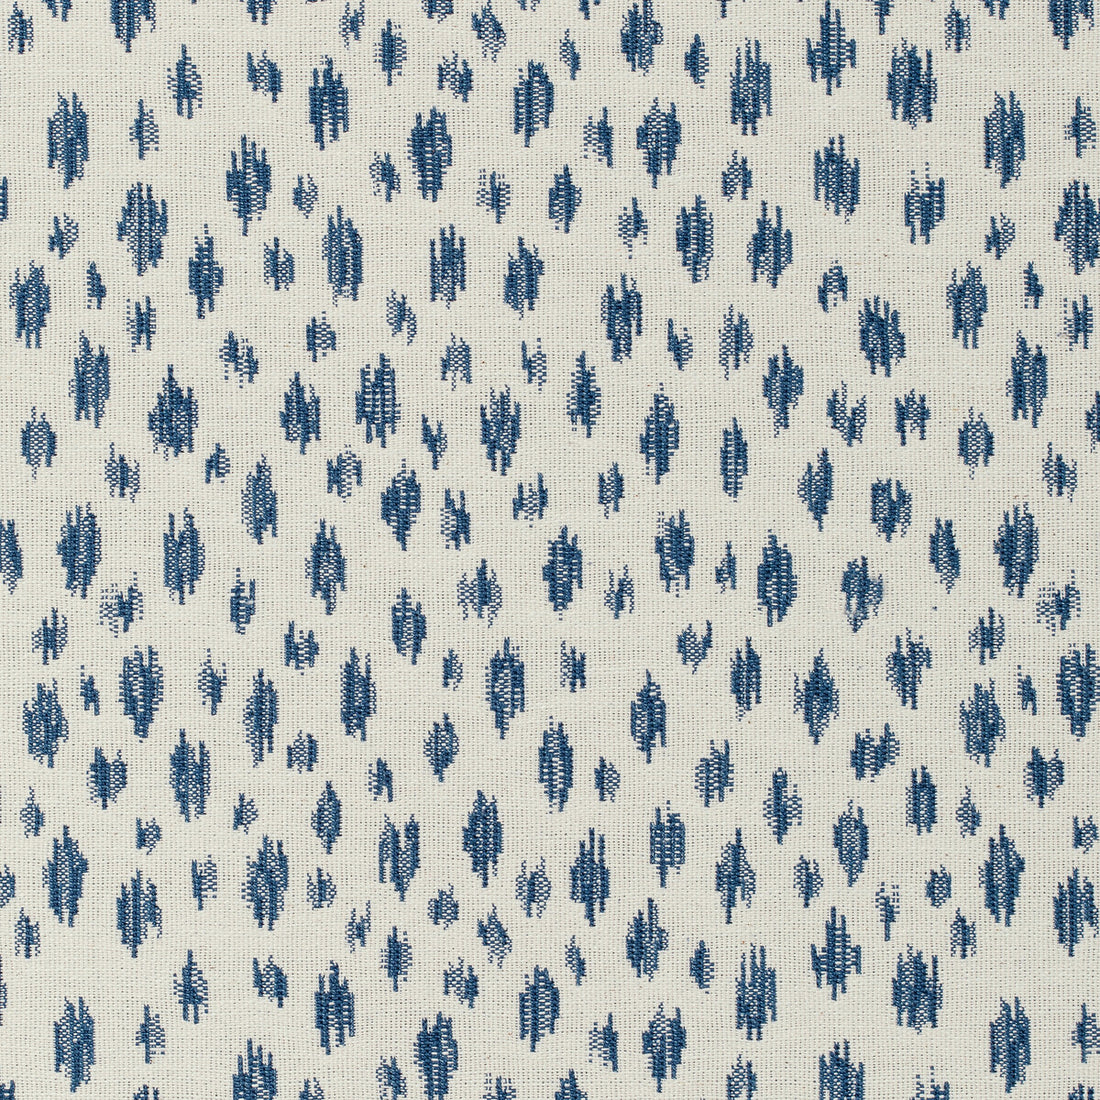 Honfleur Woven fabric in navy color - pattern 8020112.50.0 - by Brunschwig &amp; Fils in the Granville Weaves collection